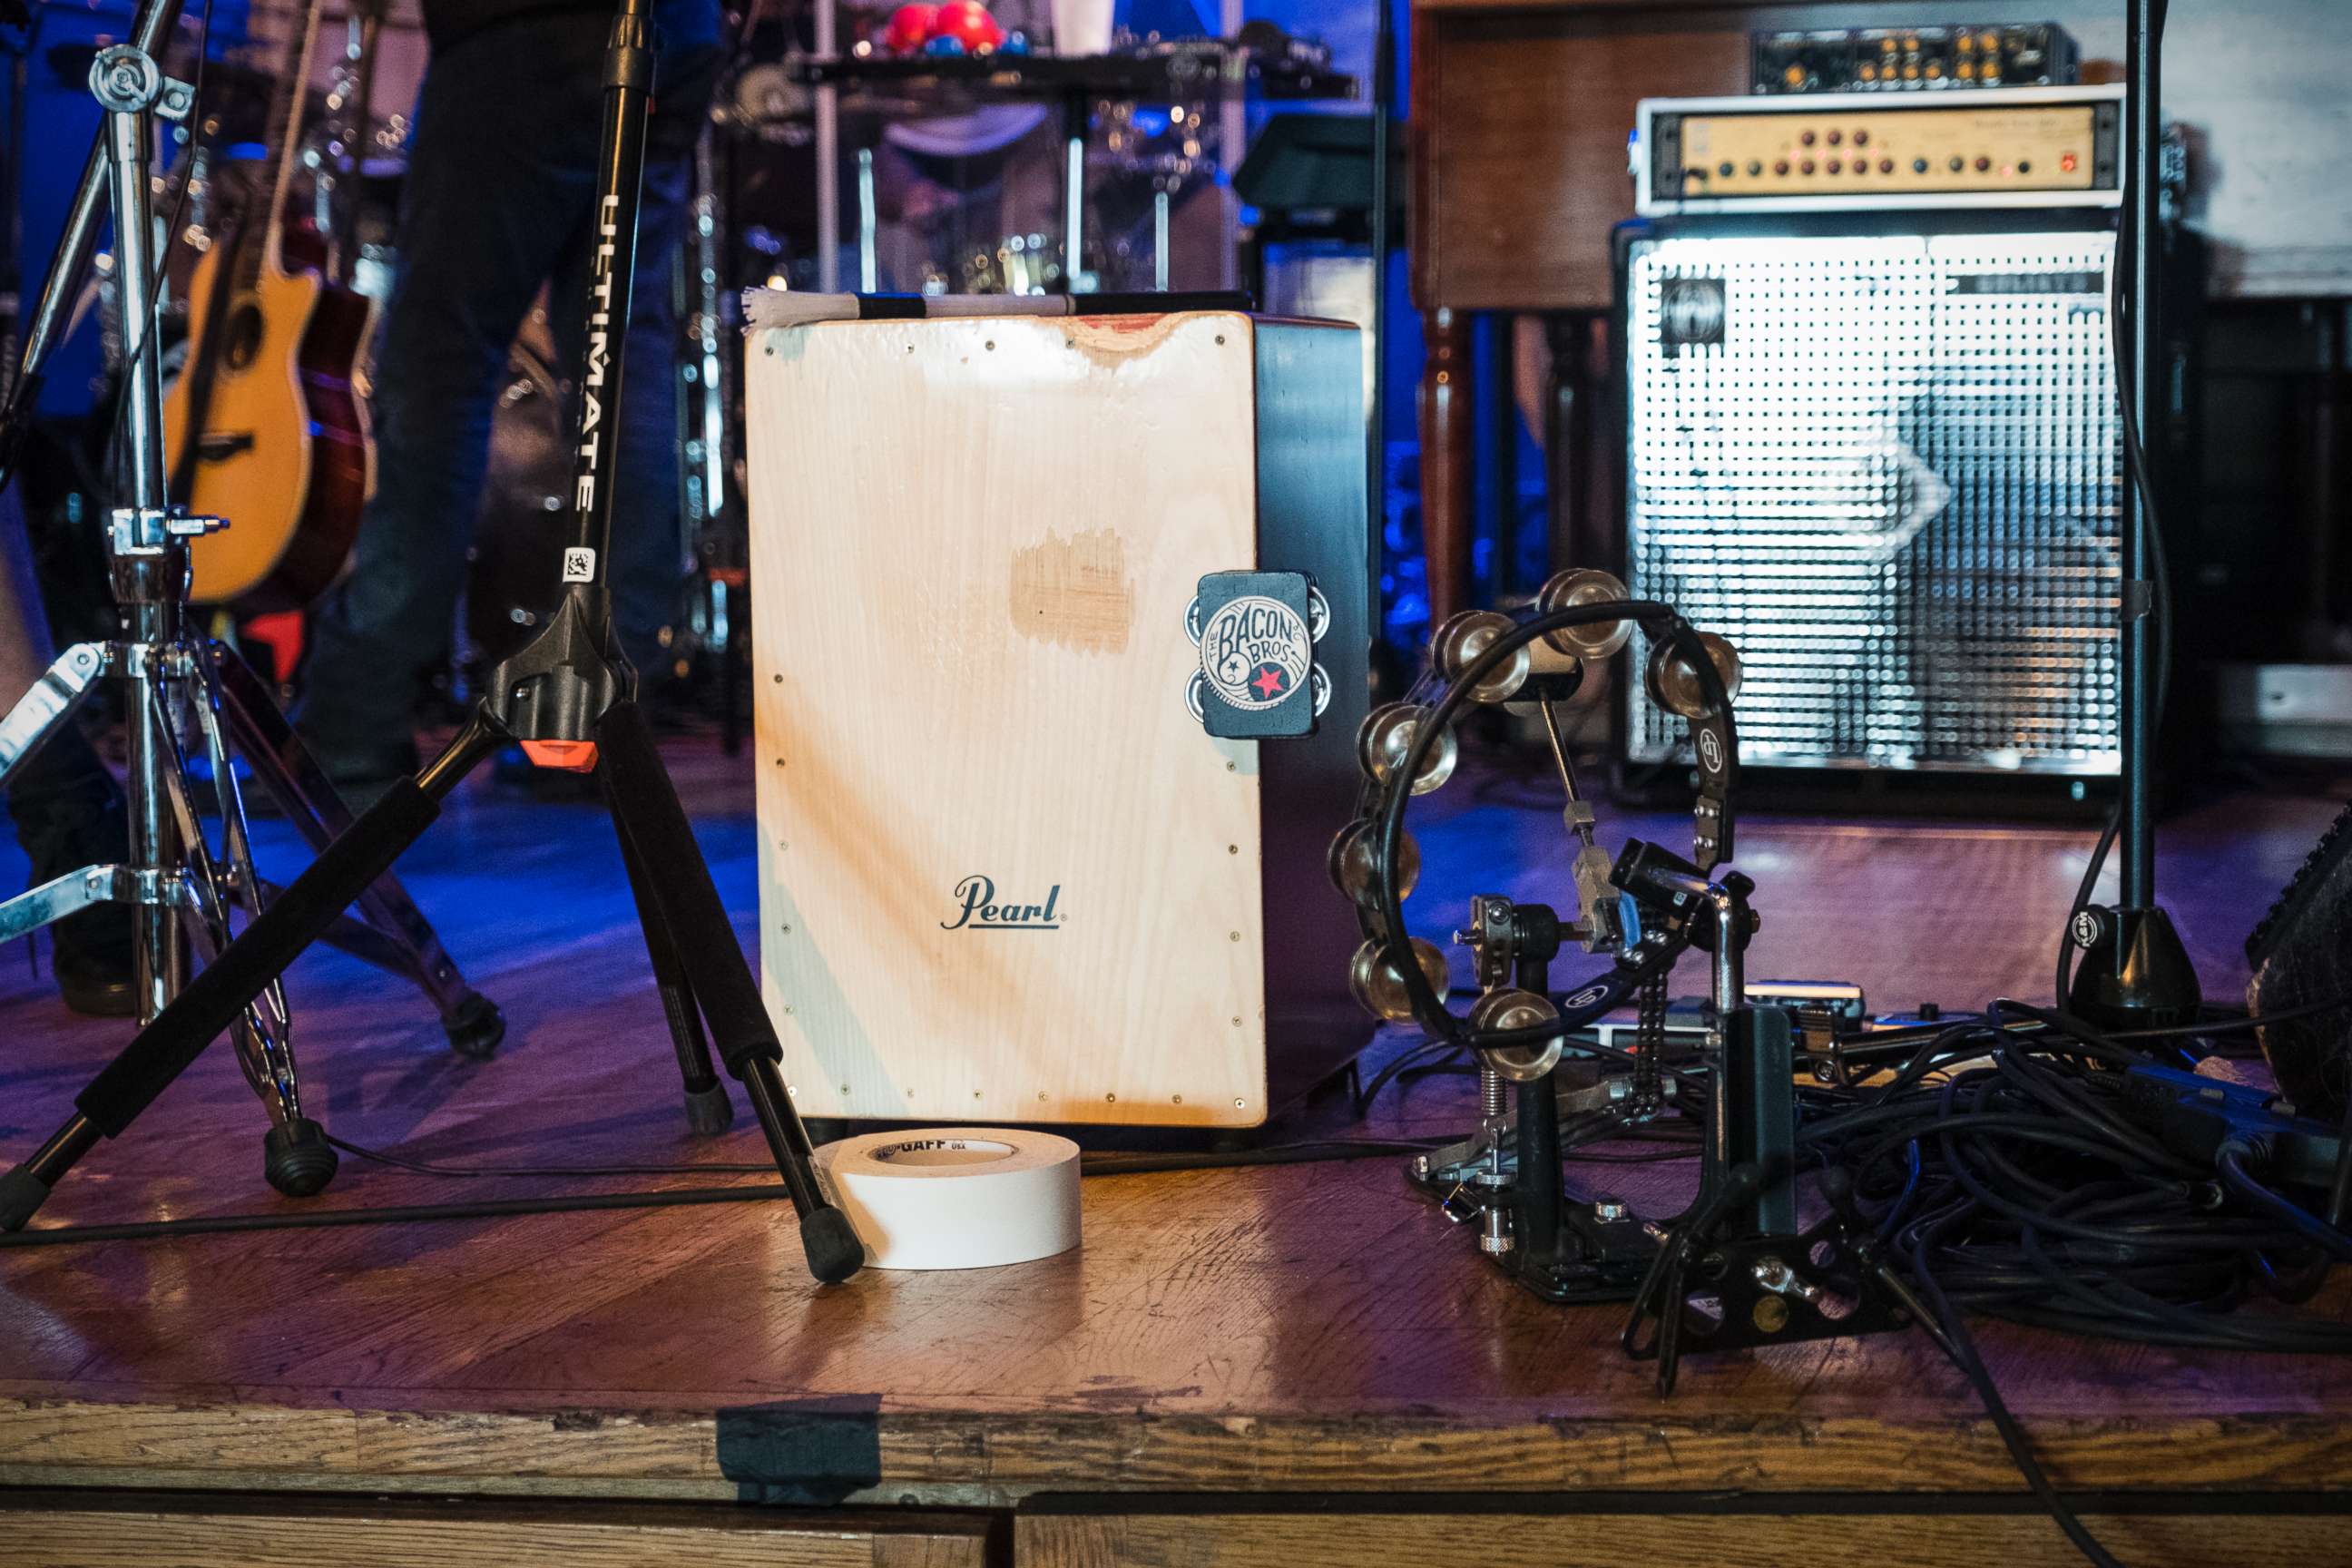 PHOTO: The Bacon Brothers instruments are set up for their sound check ahead of their sold out show at City Winery in New York City, on August 22.
